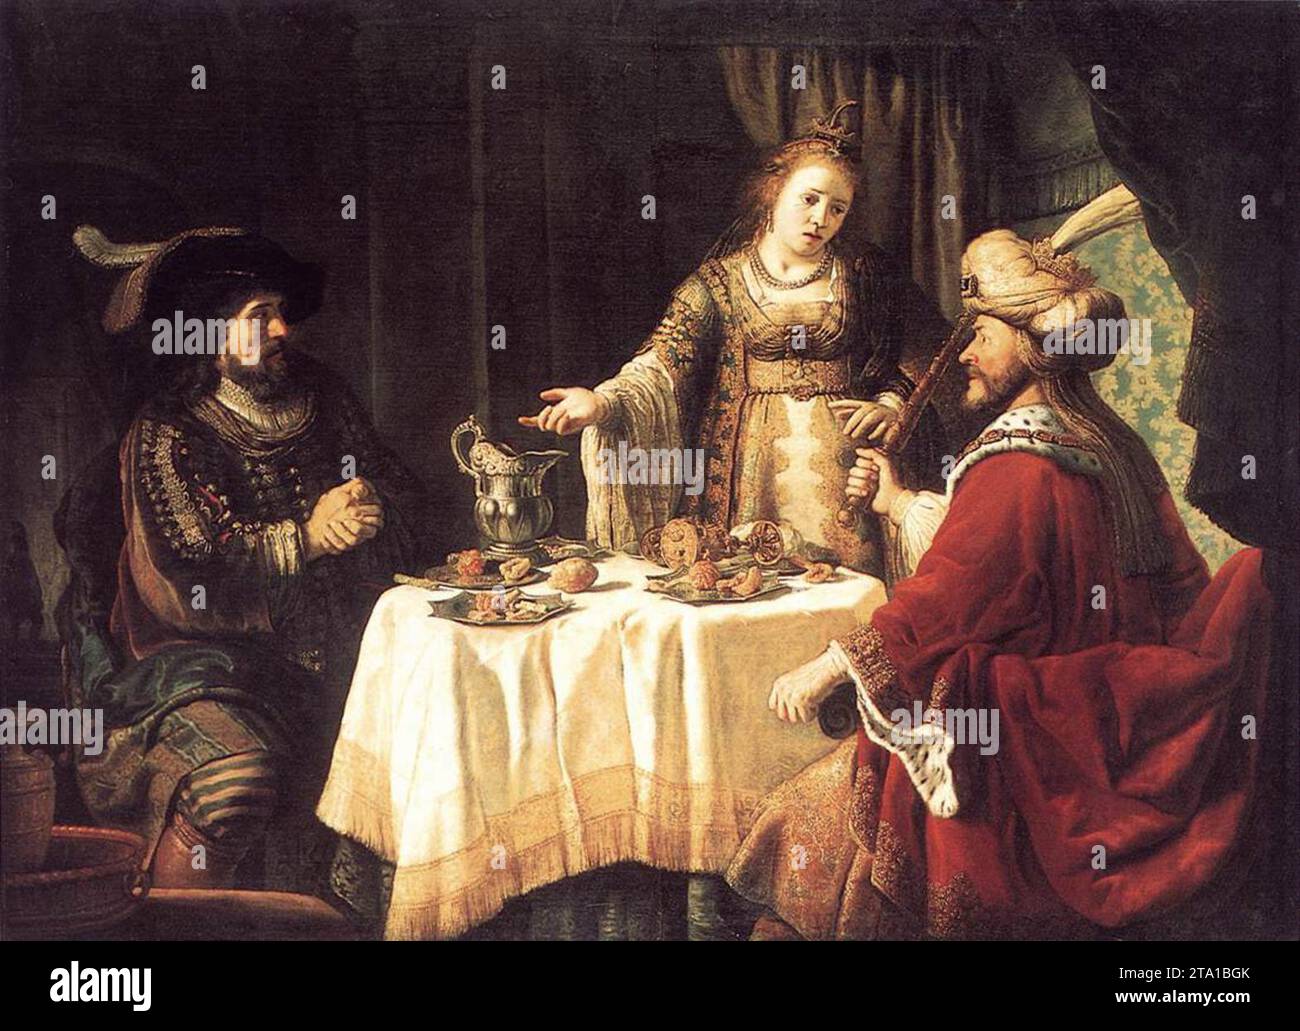 The Banquet of Esther and Ahasuerus 1640s by Jan Victors Stock Photo